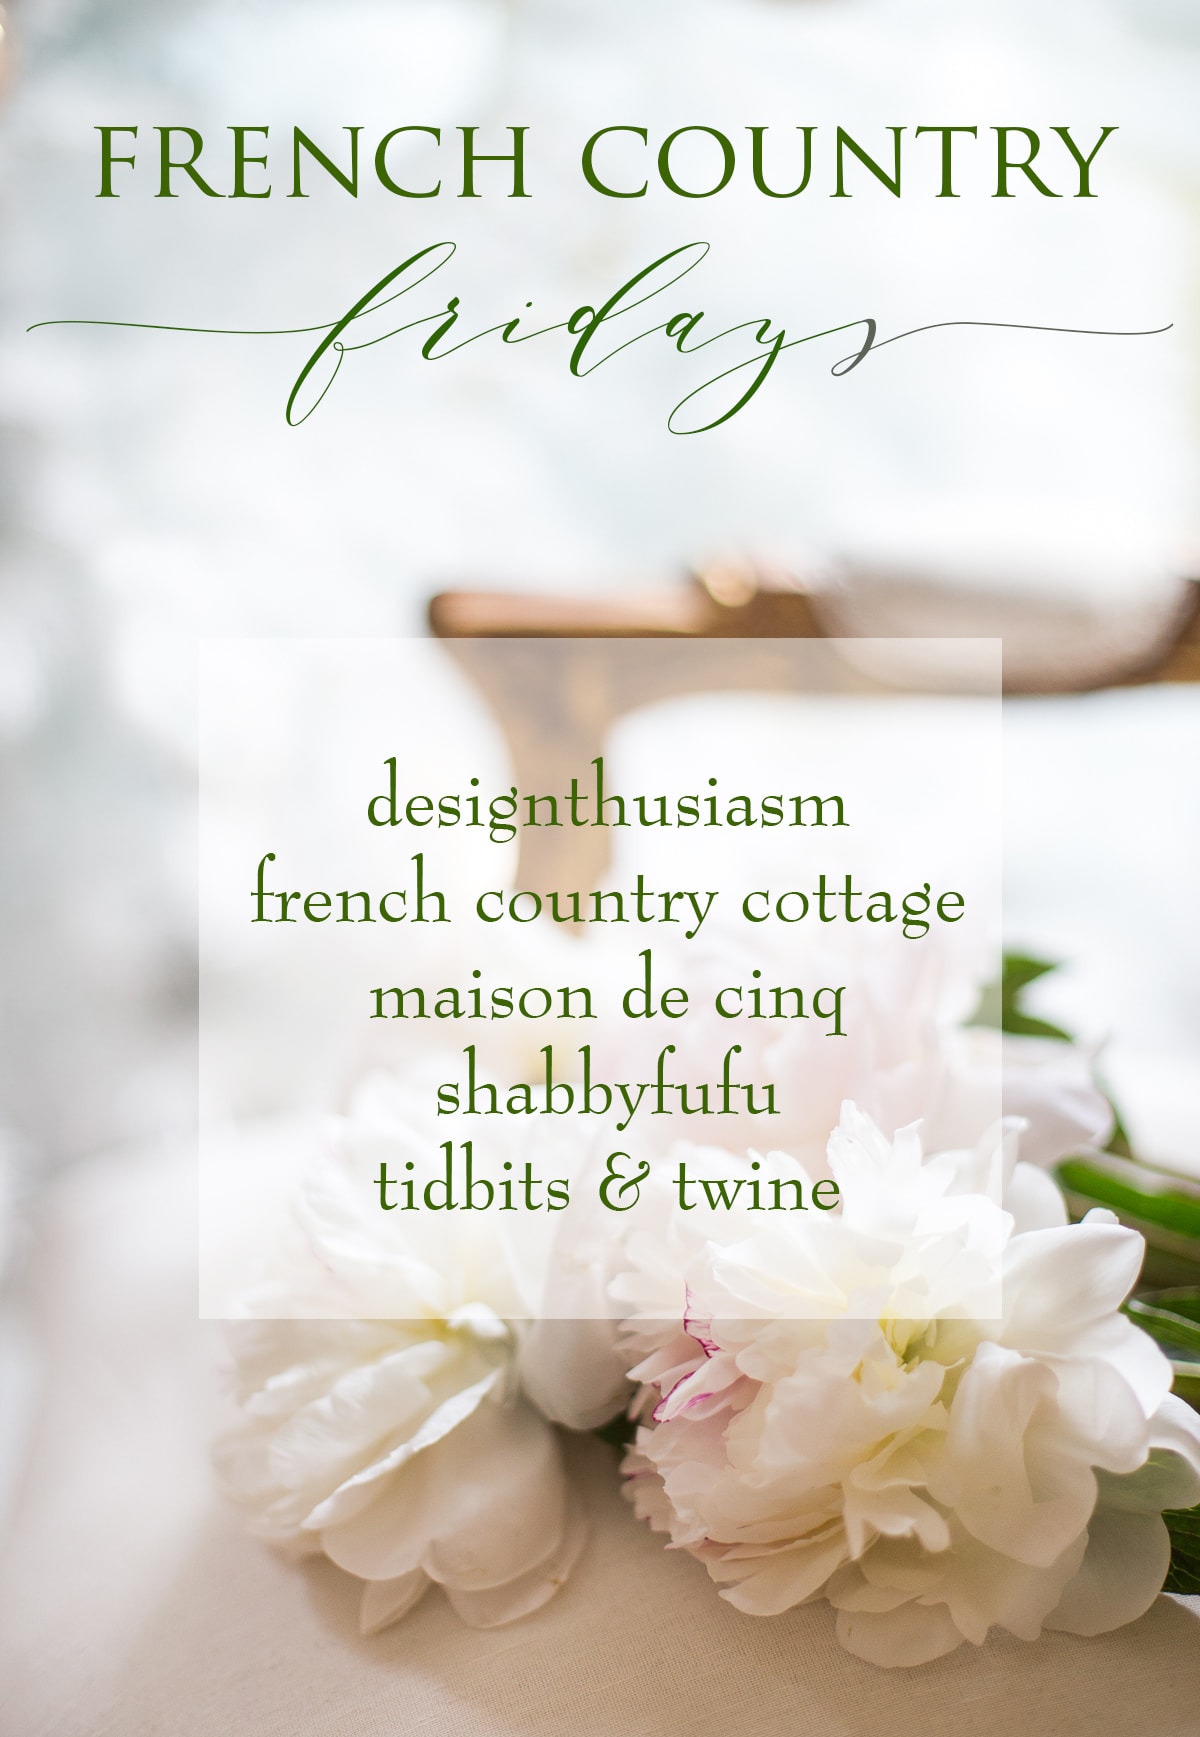 French Country Fridays 132 – Celebrating the Beauty of French Decor